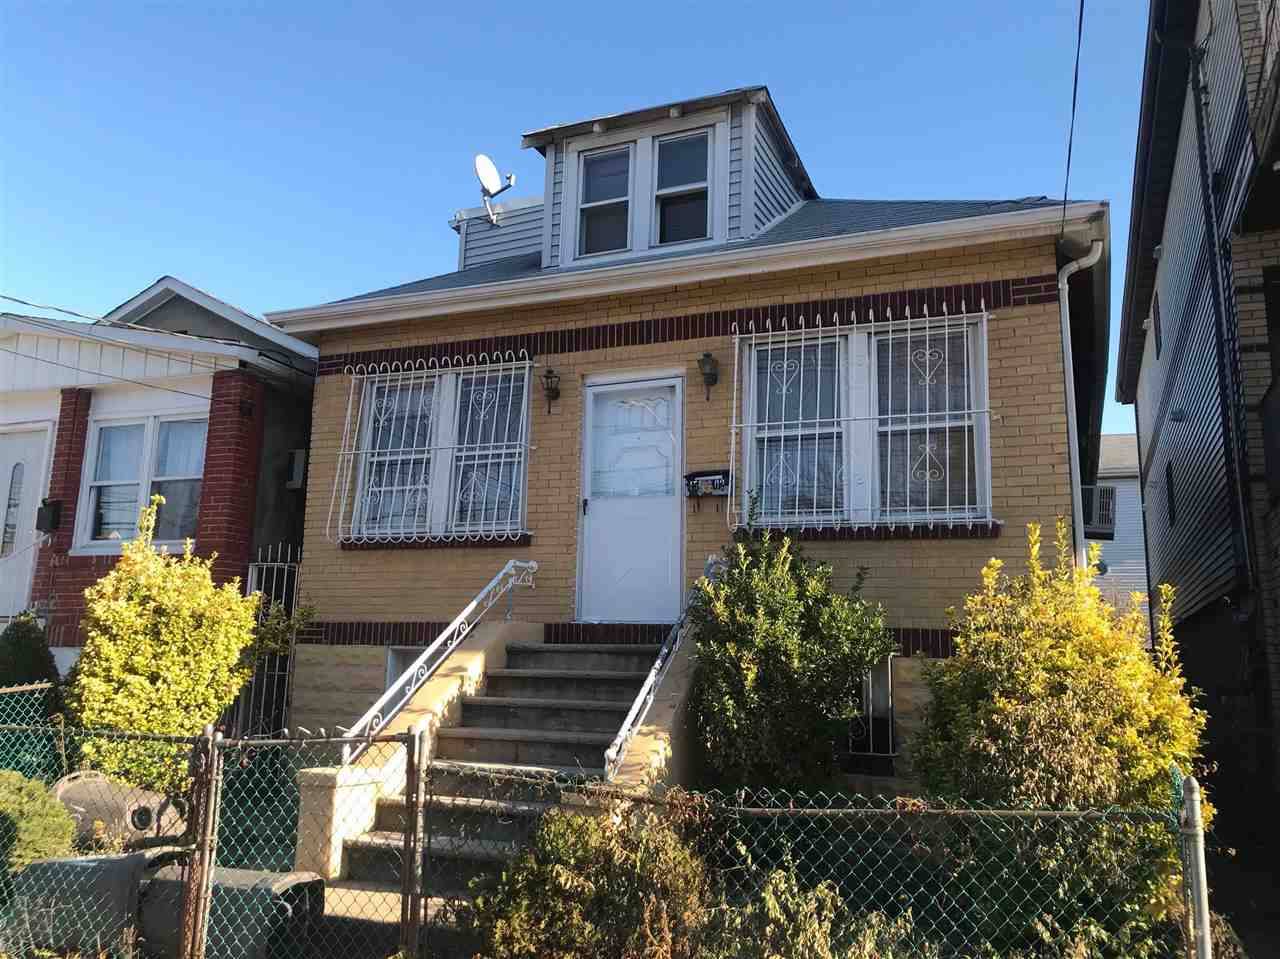 GREAT INVESTMENT OPPORTUNITY - 3 BR New Jersey